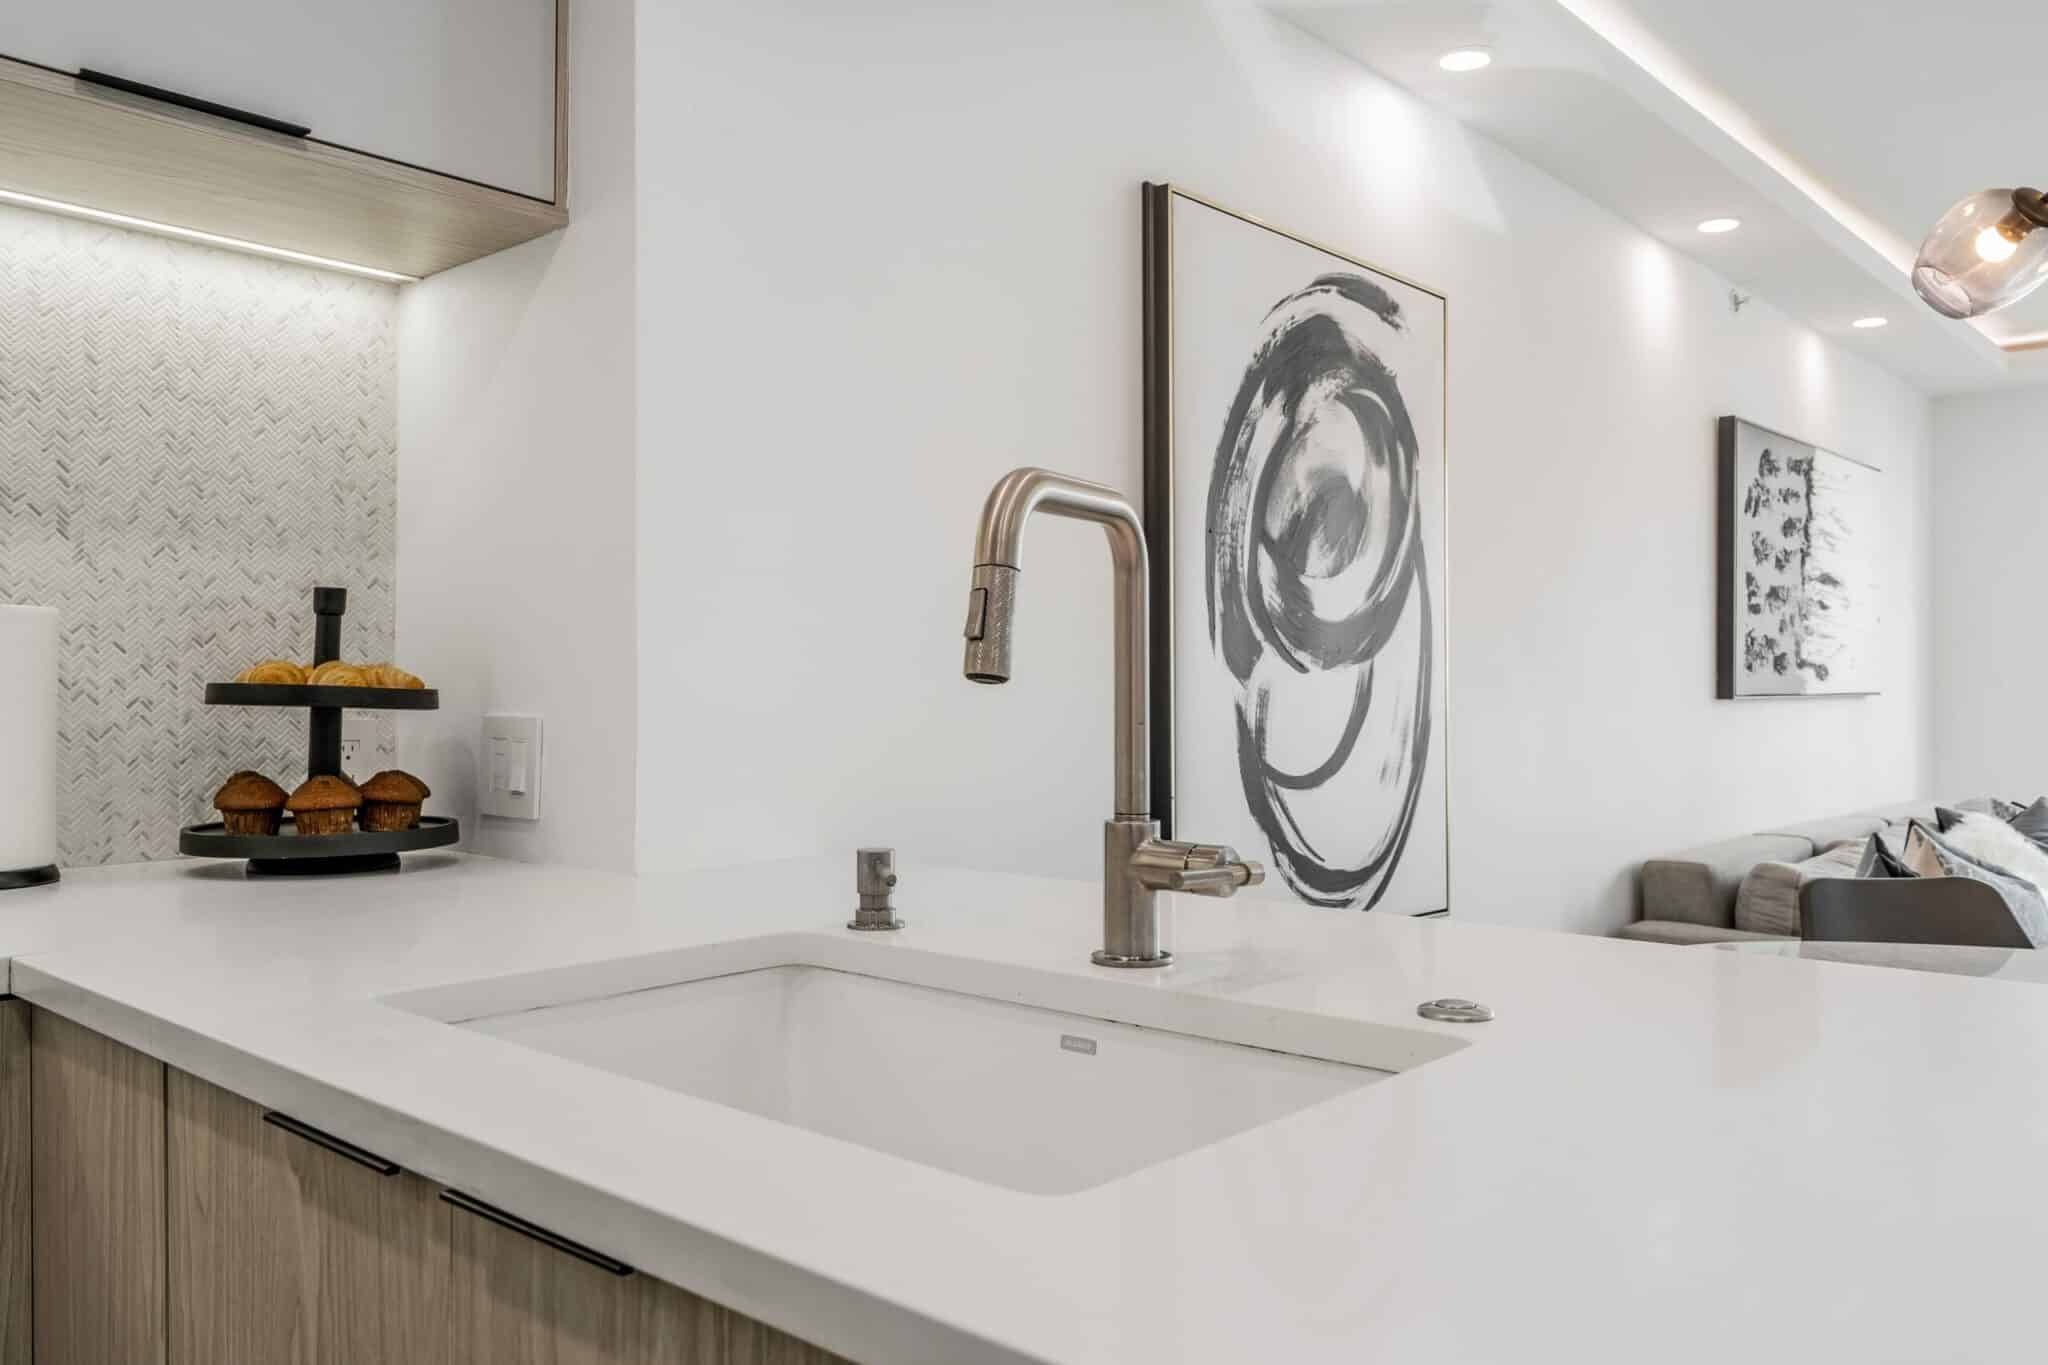 stainless-steel-faucet-white-kitchen-renovation-vancouver